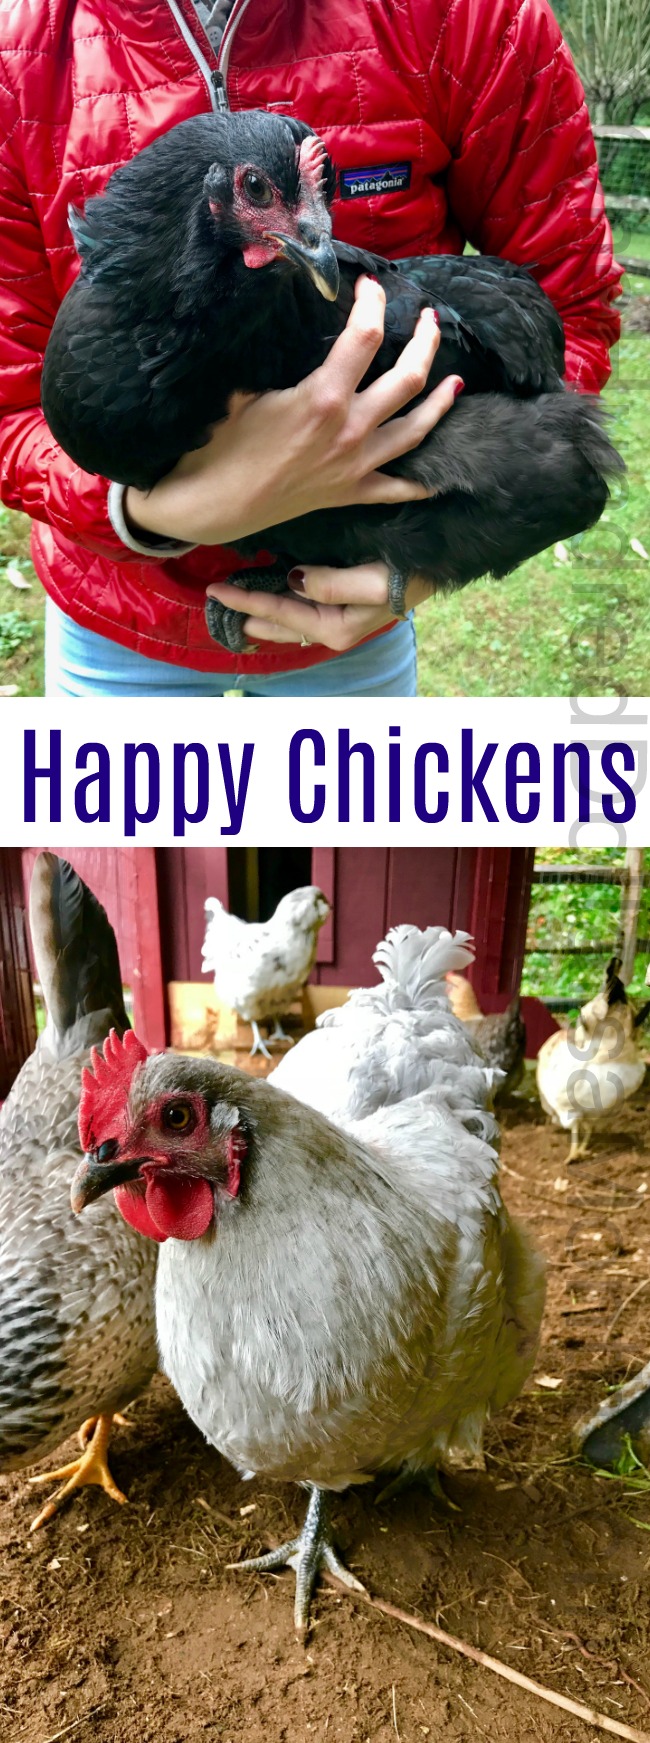 Gardening in New England – Plump Chickens, Gearing Up For Winter, and a Division of Chores